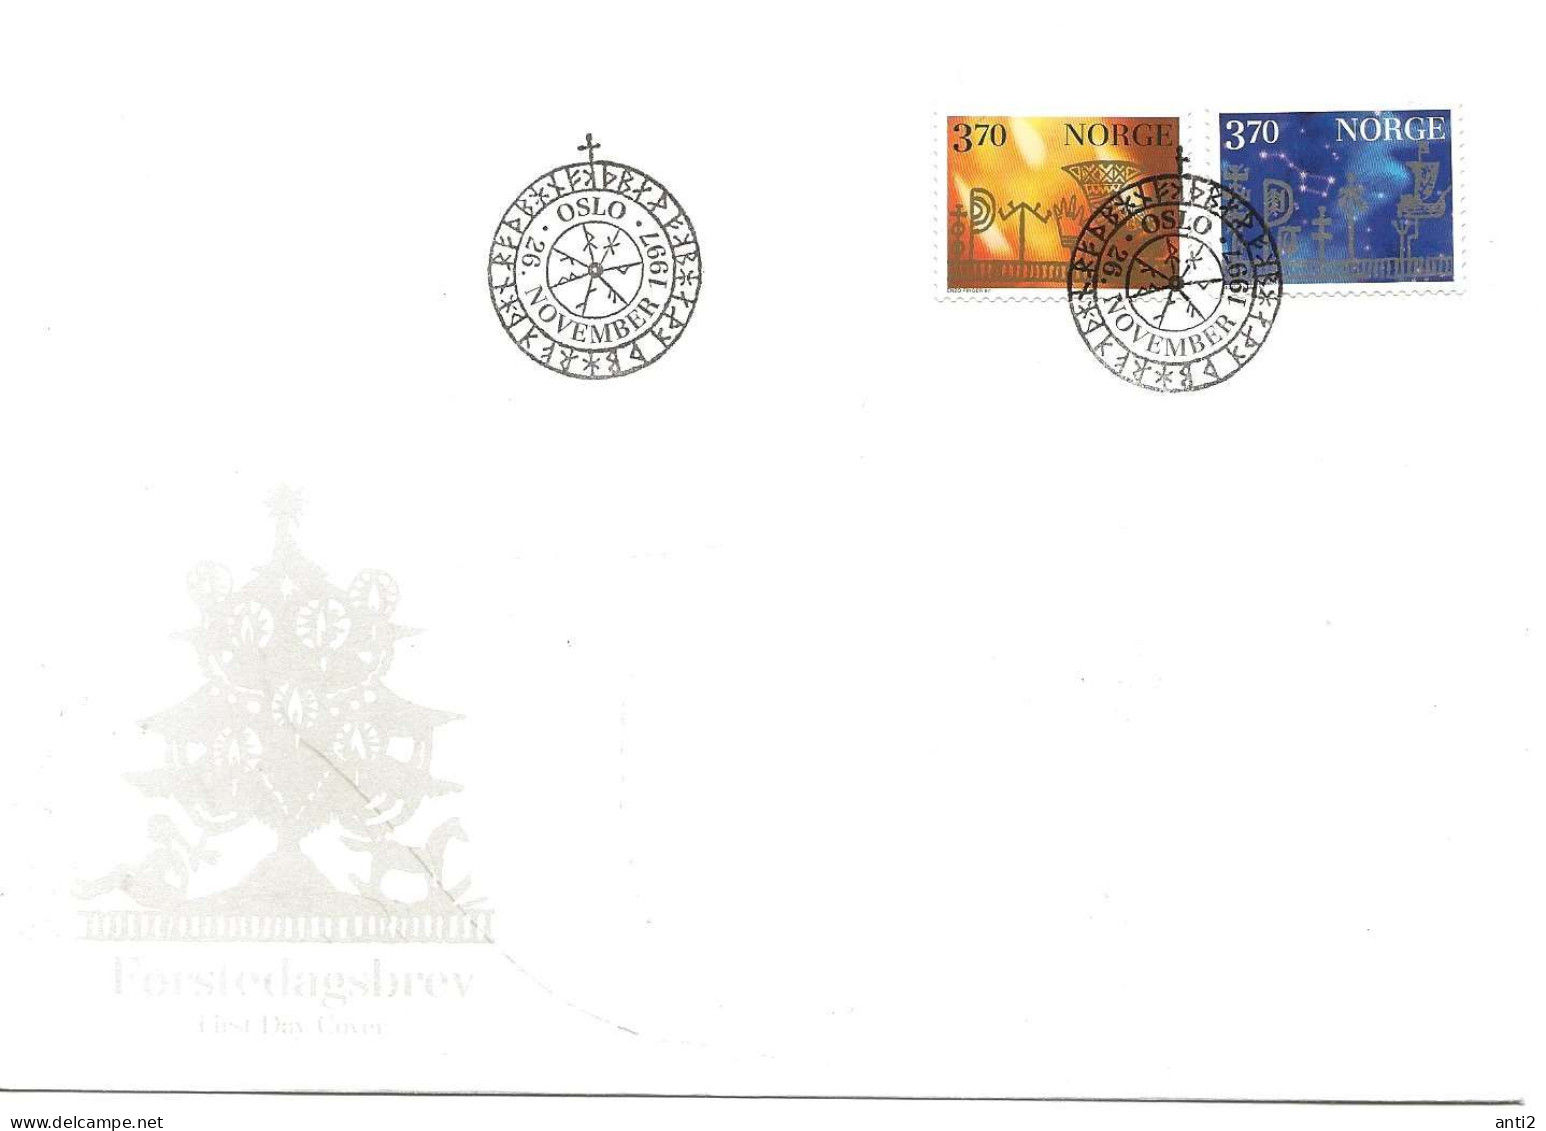 Norway Norge 1997  Christmas: Medieval Calendar Bars  1265 - 1266  FDC - Covers & Documents